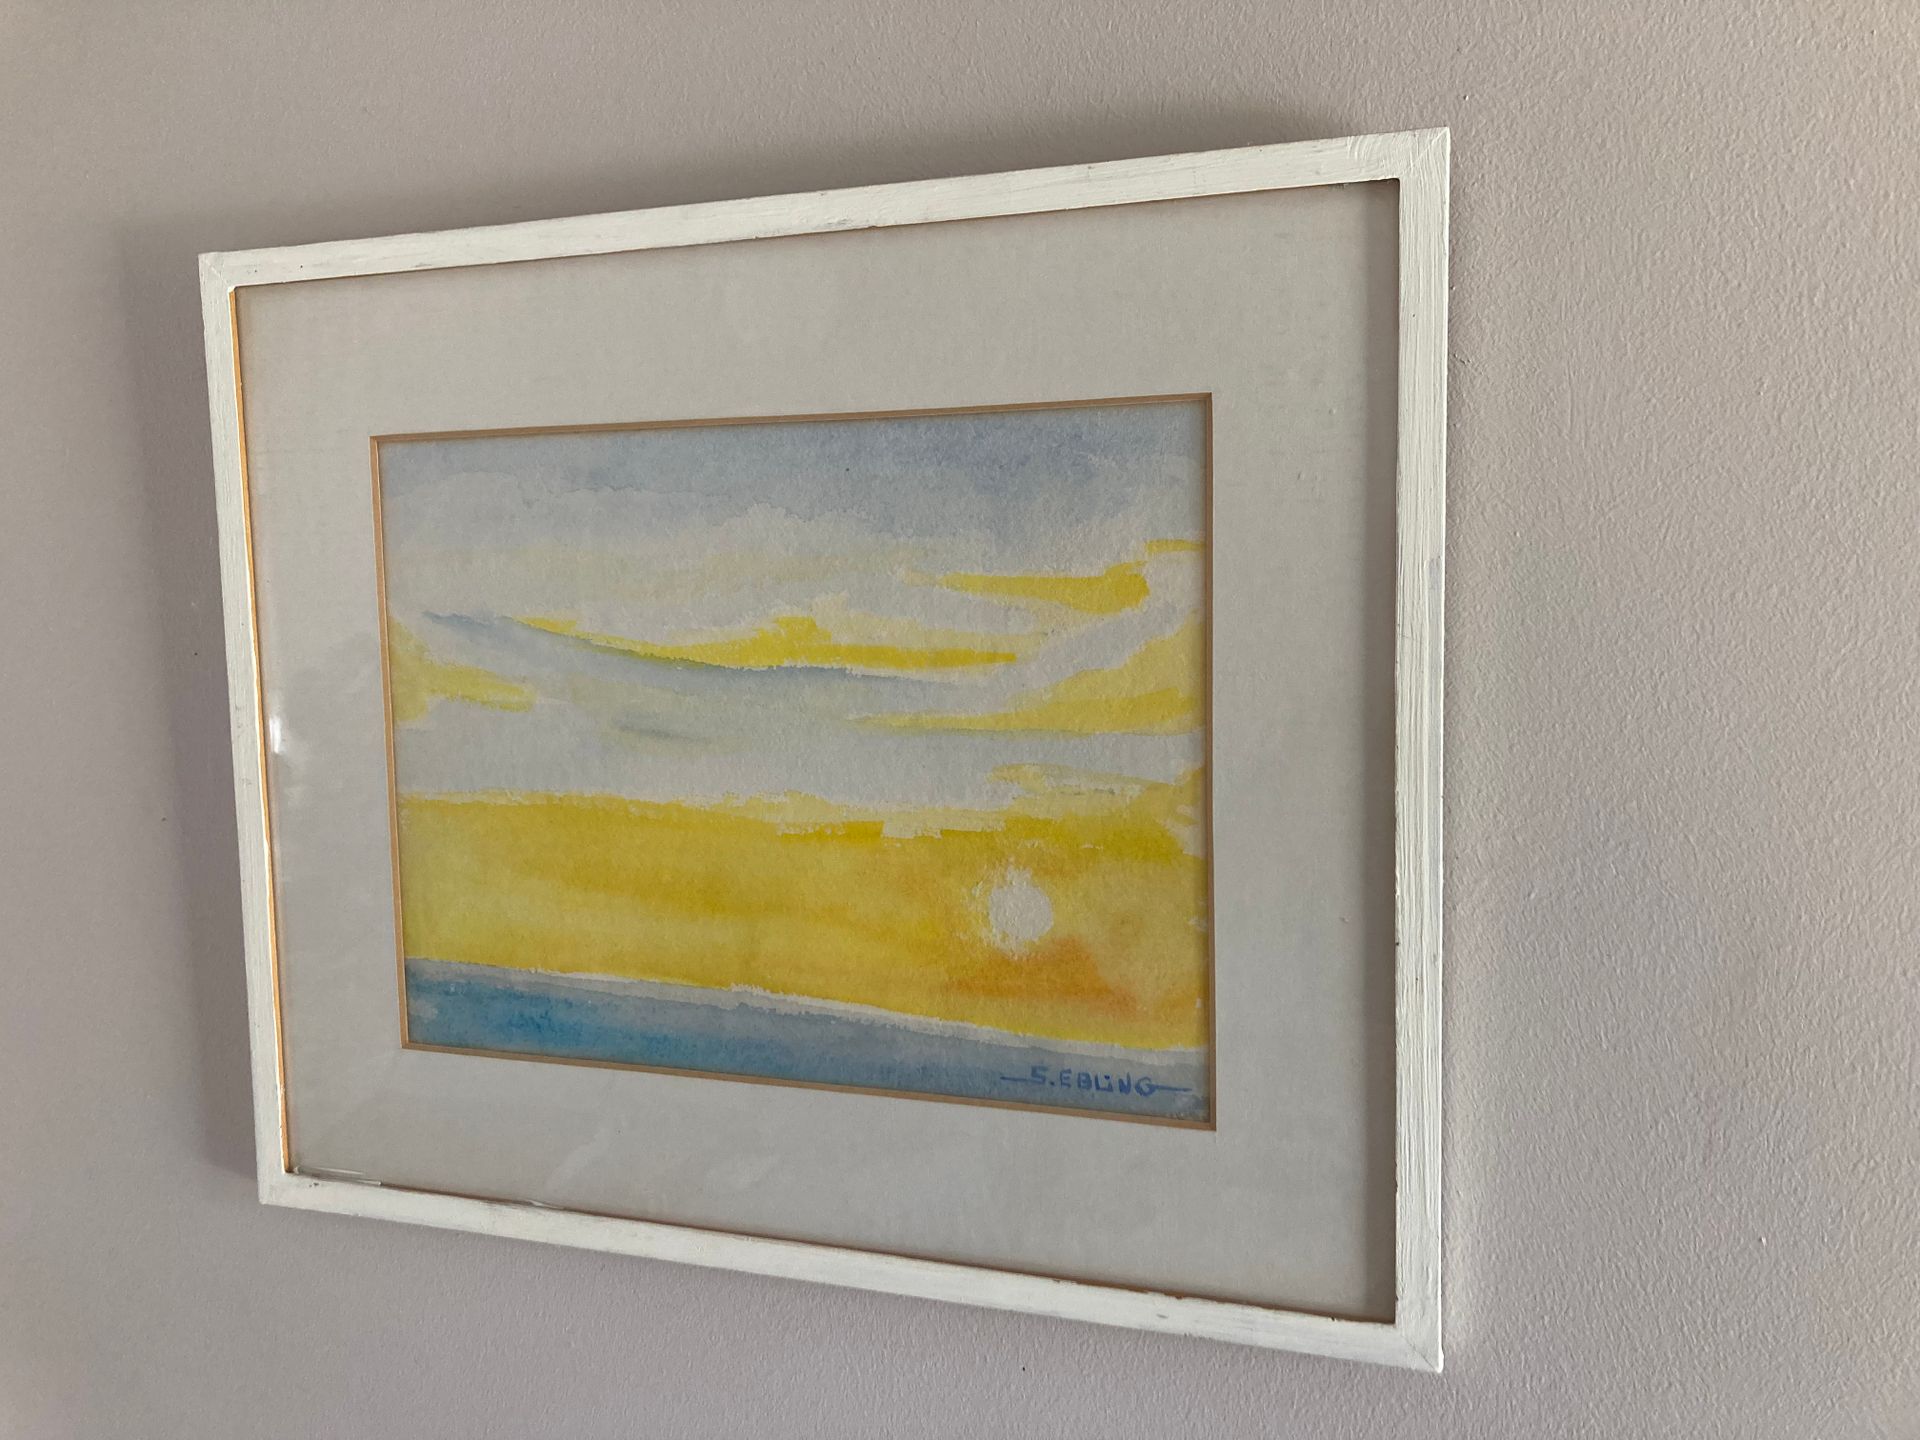 Null Stéphane EBLING 
Sunset
Watercolor. Signed lower right
23x32 cm (view)